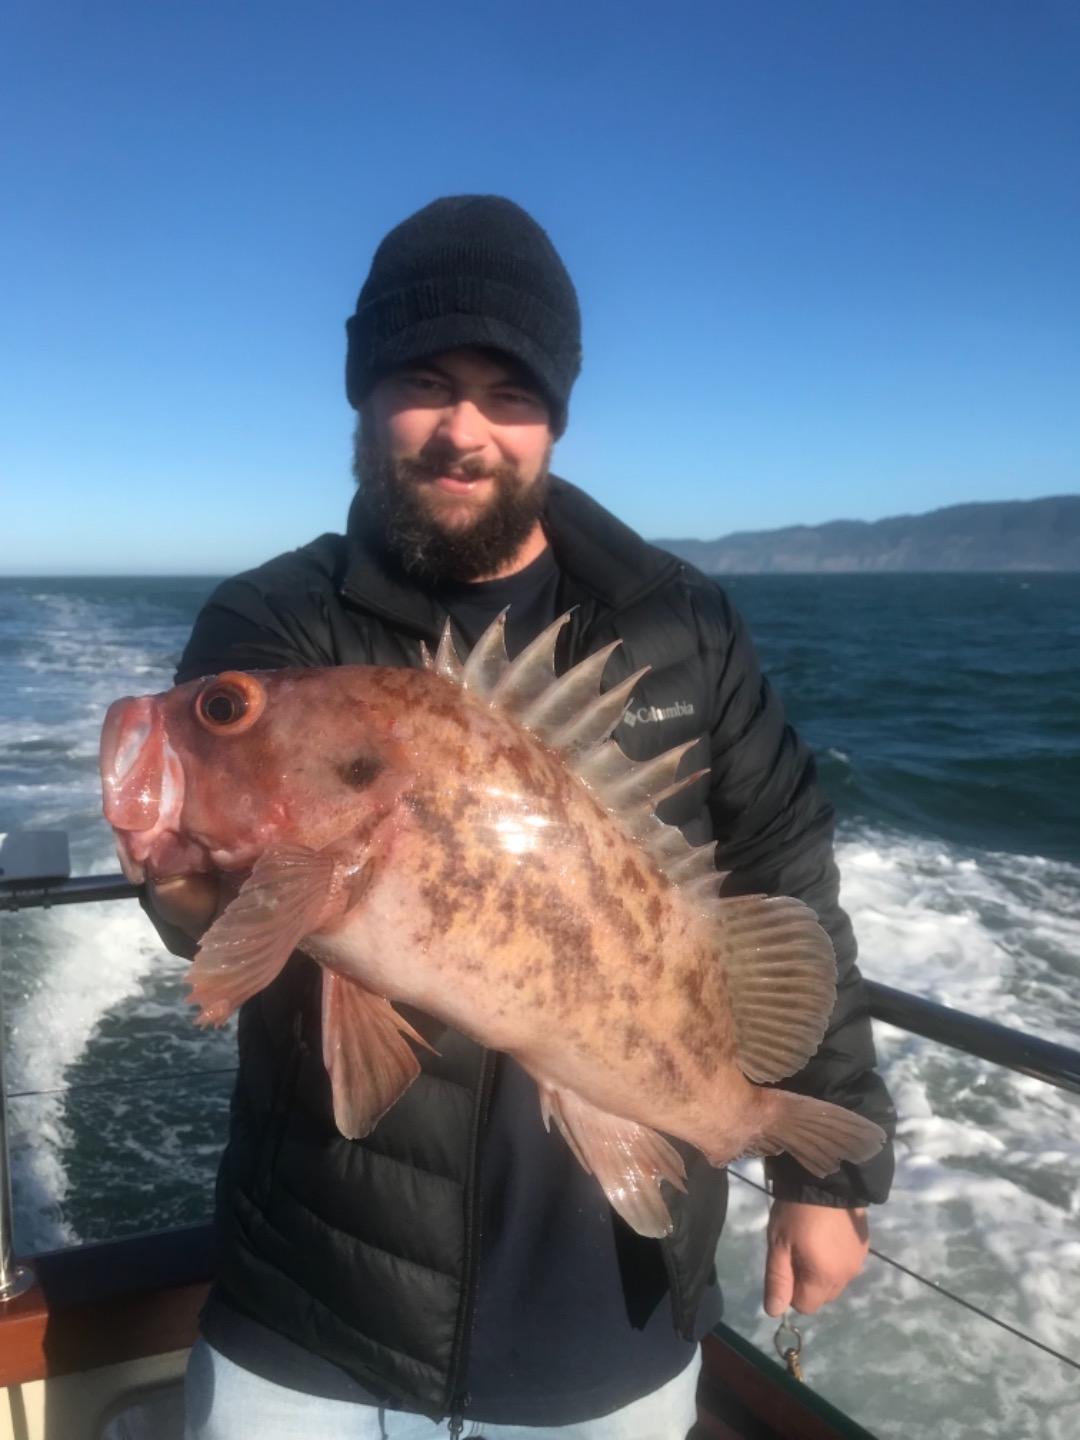 Limits of rockfish on our 1/2 day trip. 